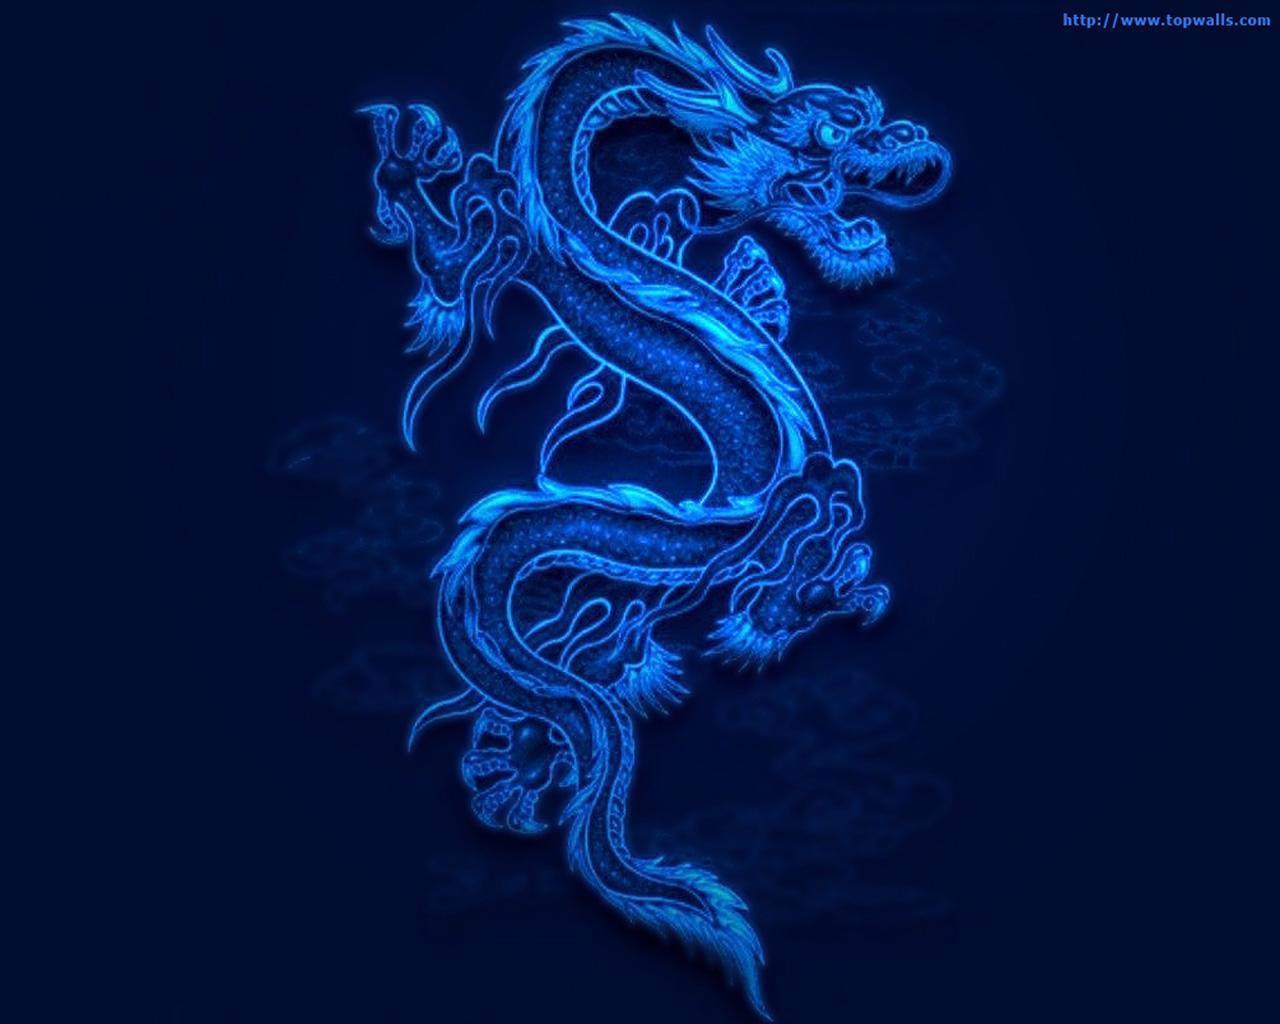 dragons, pictures, animals, blue